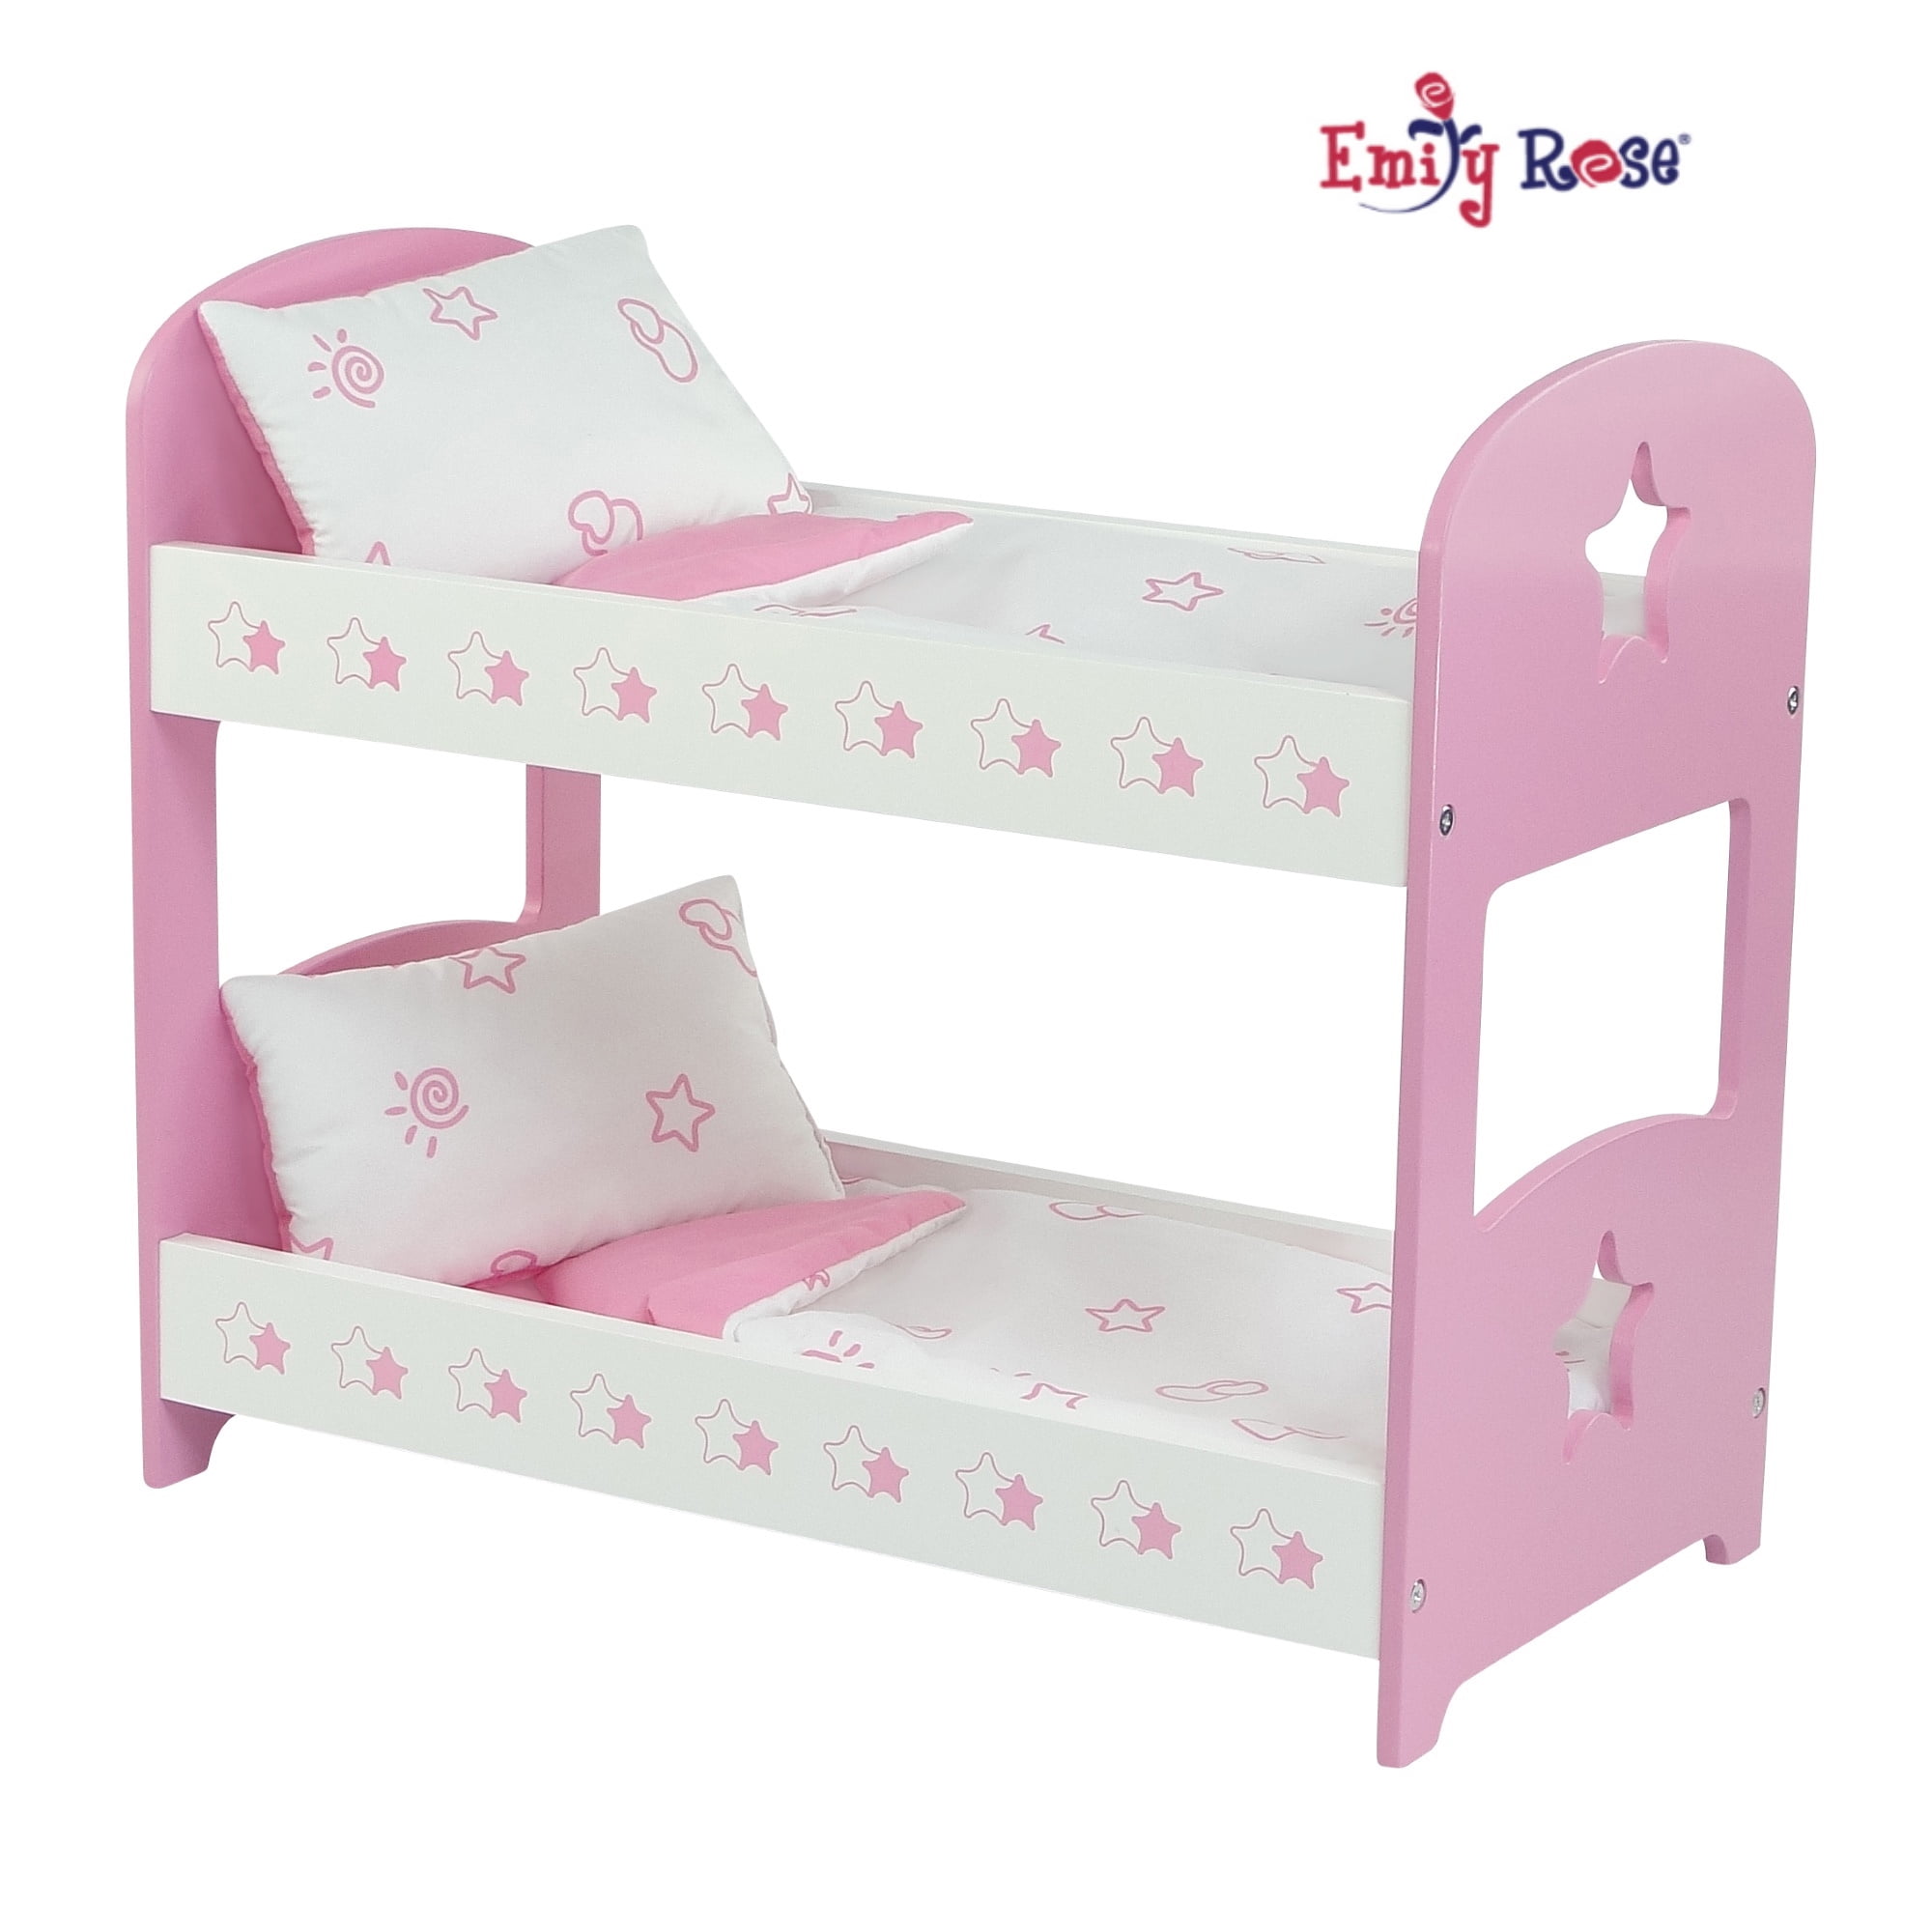 18 Inch Doll Bunk Bed Furniture, Girls Bunk Bed Sets